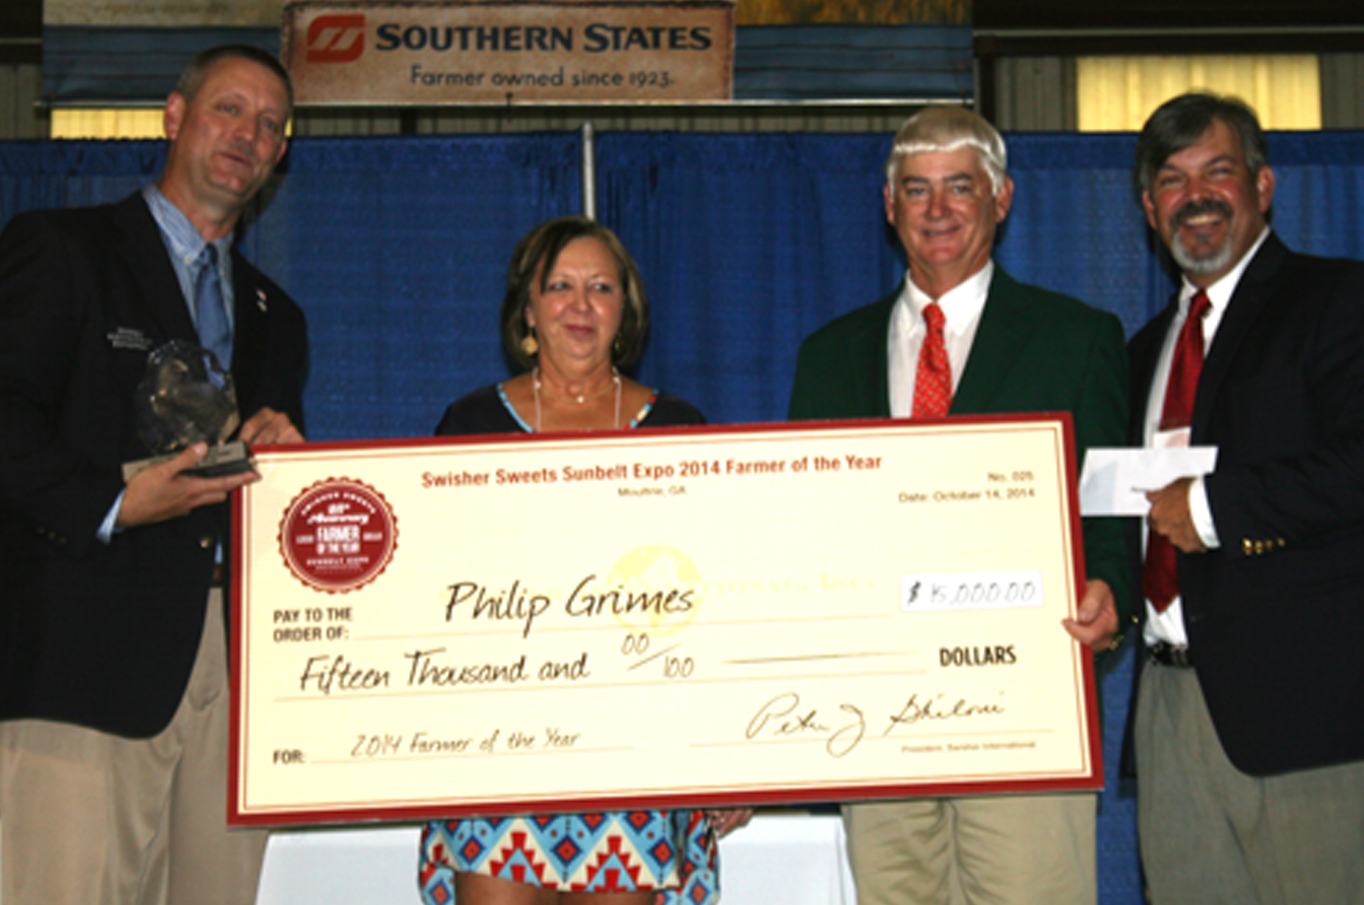 Tifton farmer Philip Grimes was named the Southeastern Farmer of the Year at this year's Sunbelt Expo in Moultrie on Tuesday, Oct. 14.